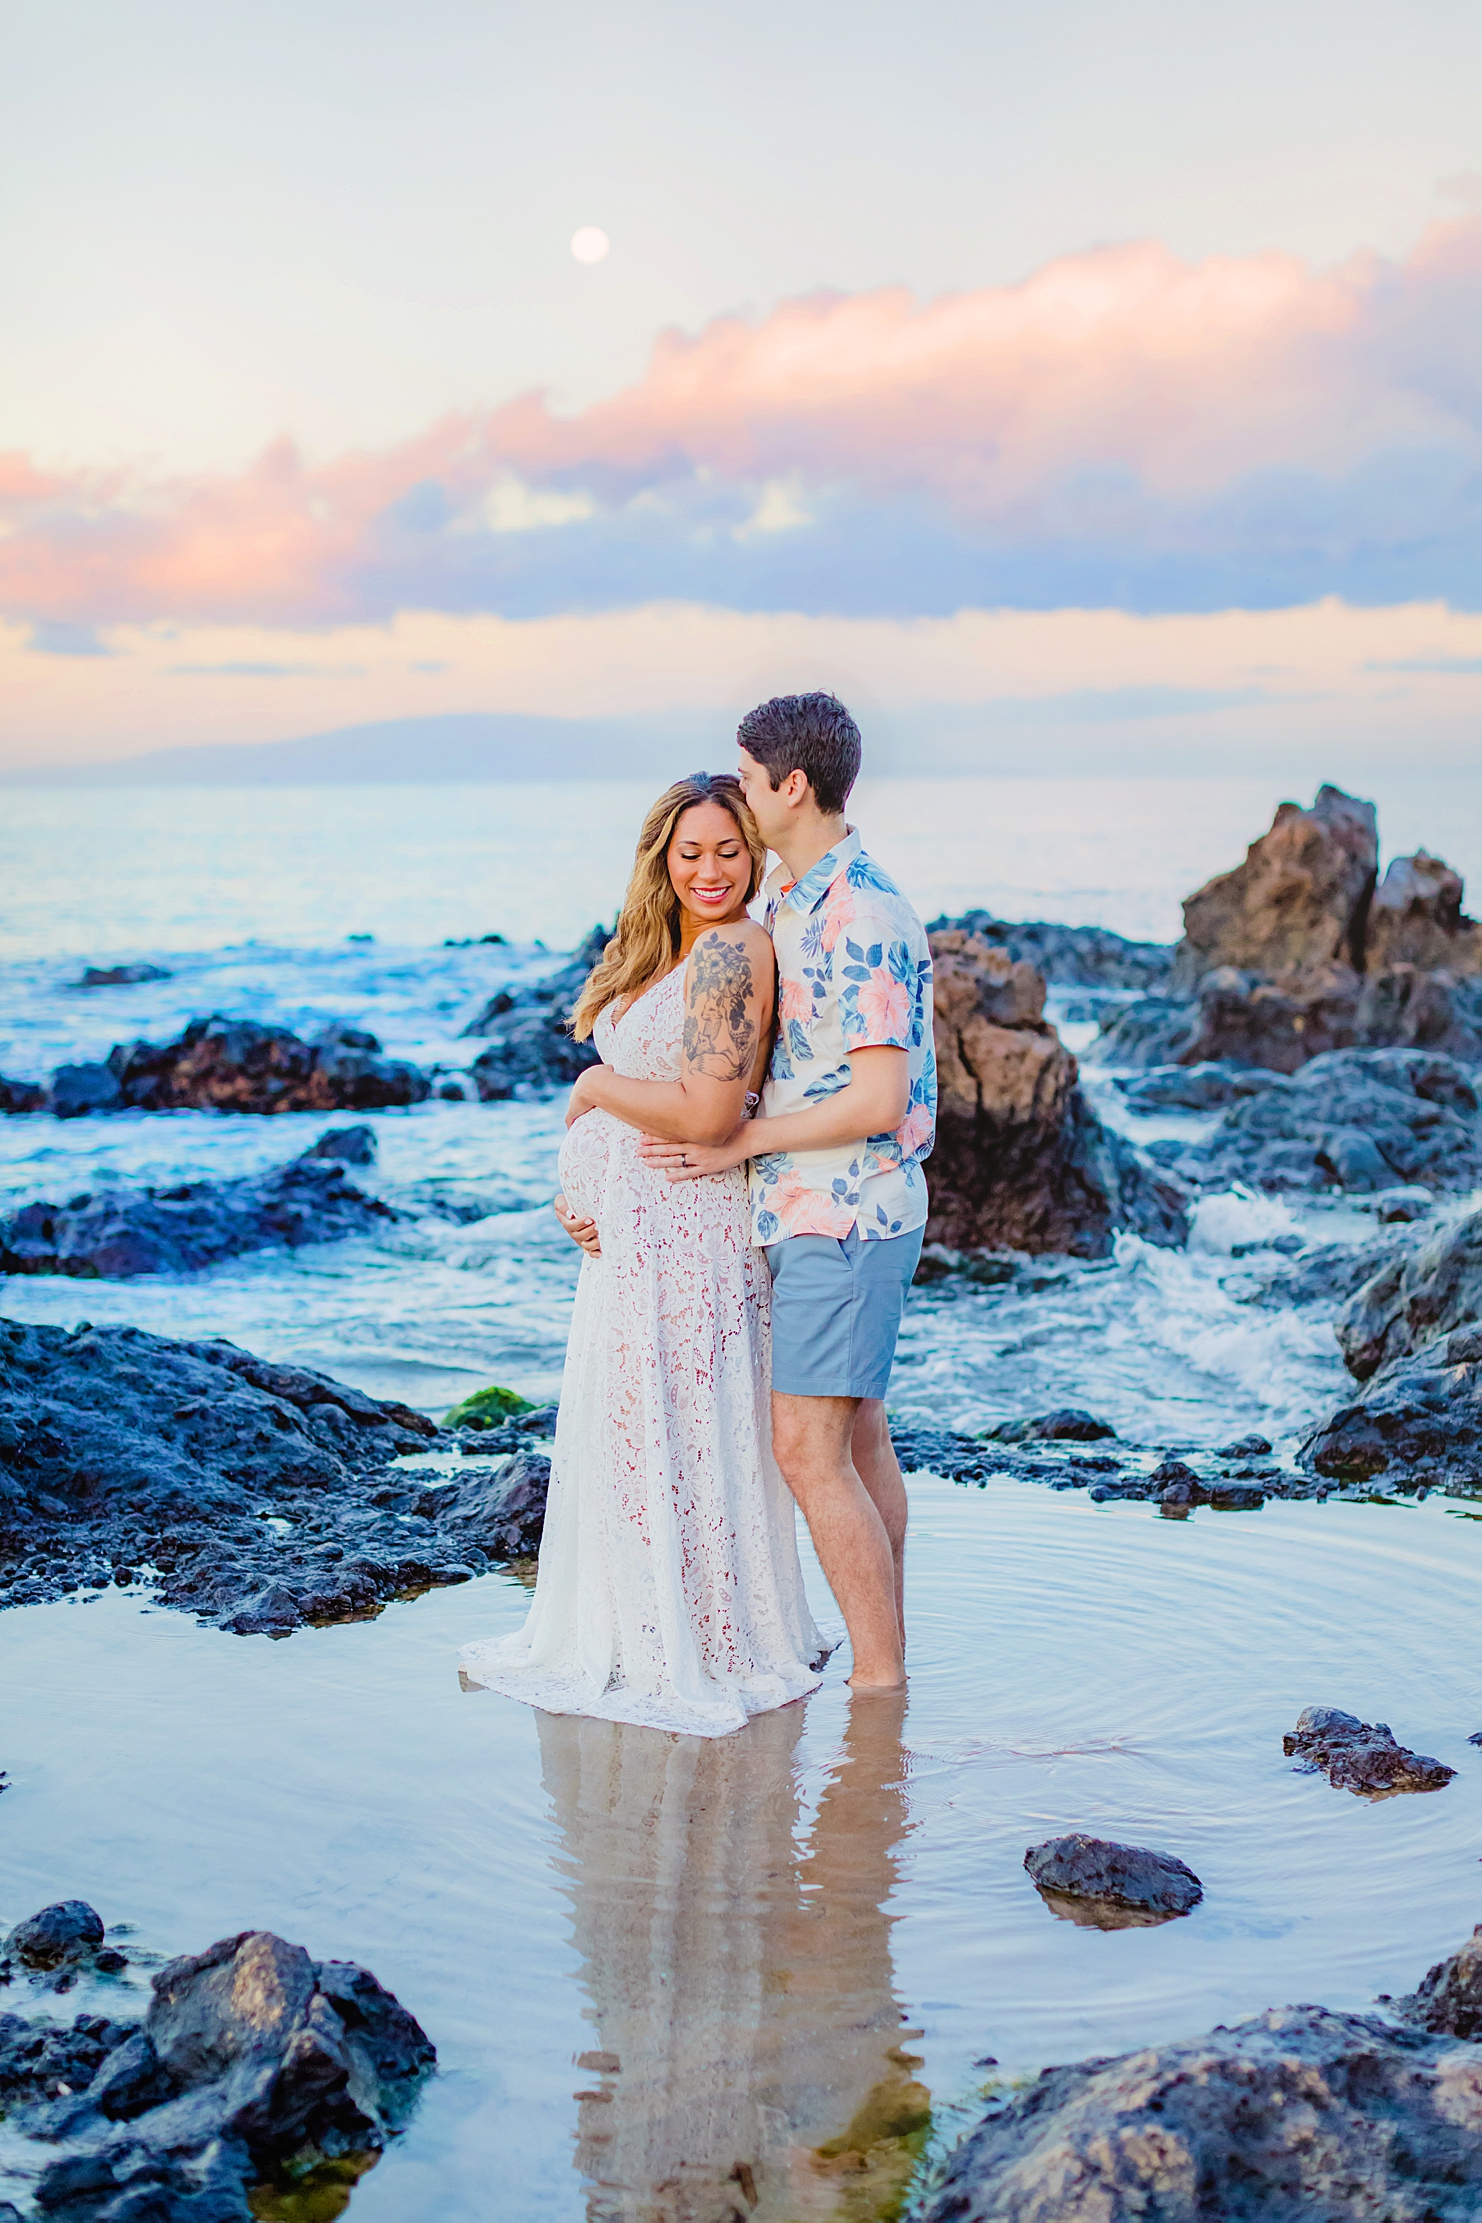 Pregnant woman in white lace gown under the full moon at sunrise in Hawaii